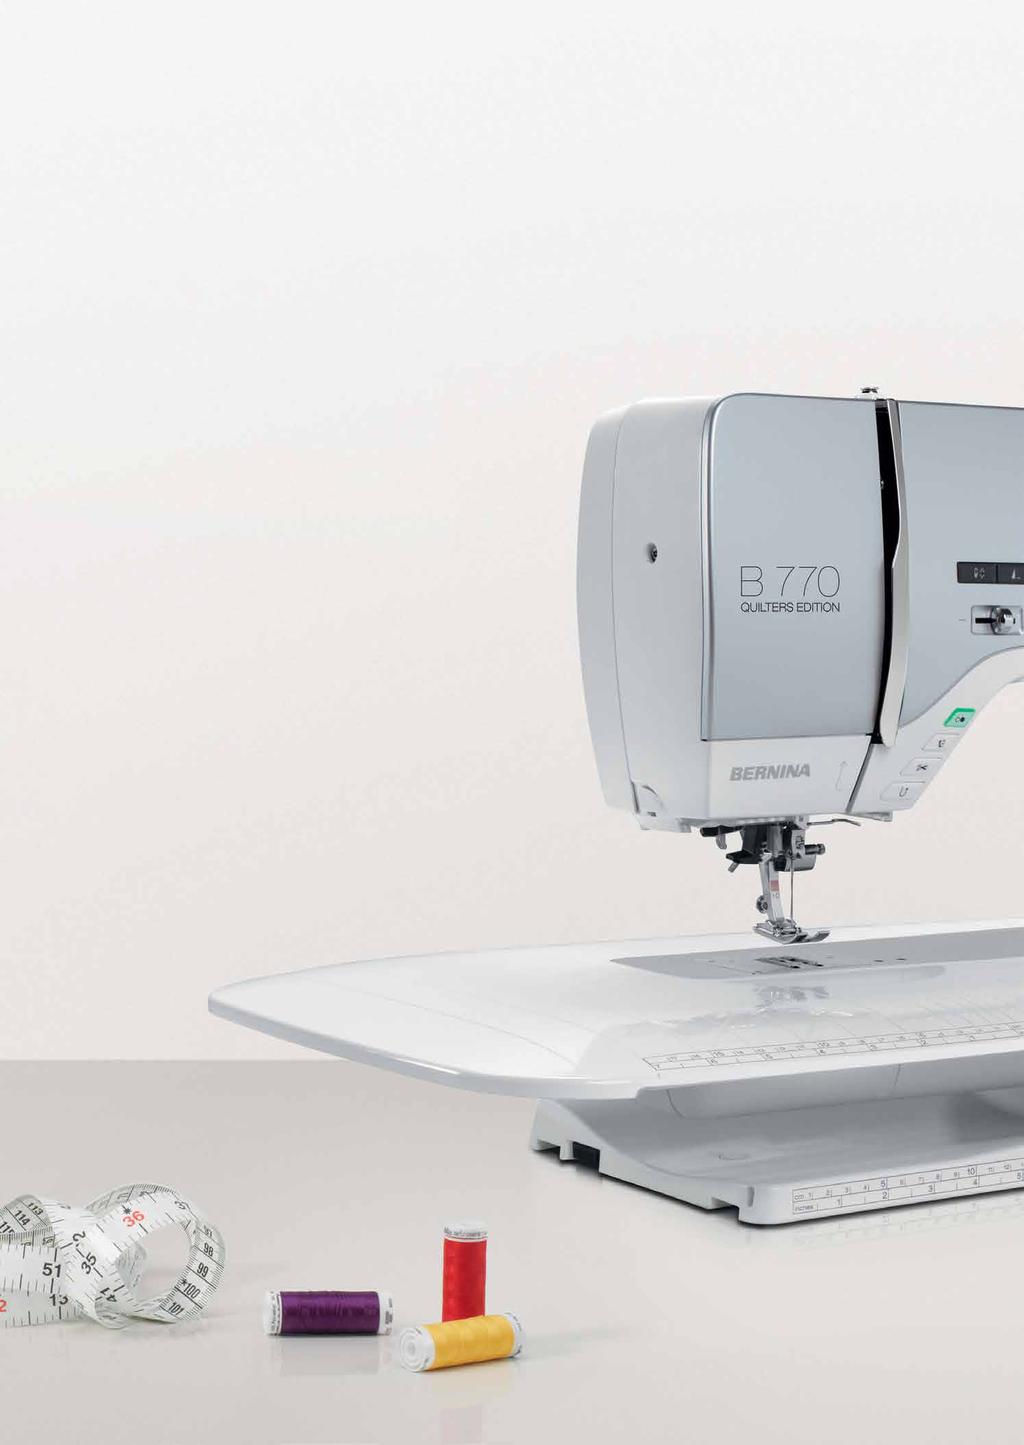 BERNINA Quality For decades, BERNINA has been passionately committed to the development of sewing and embroidery machines. Swiss precision is at the heart of our products.